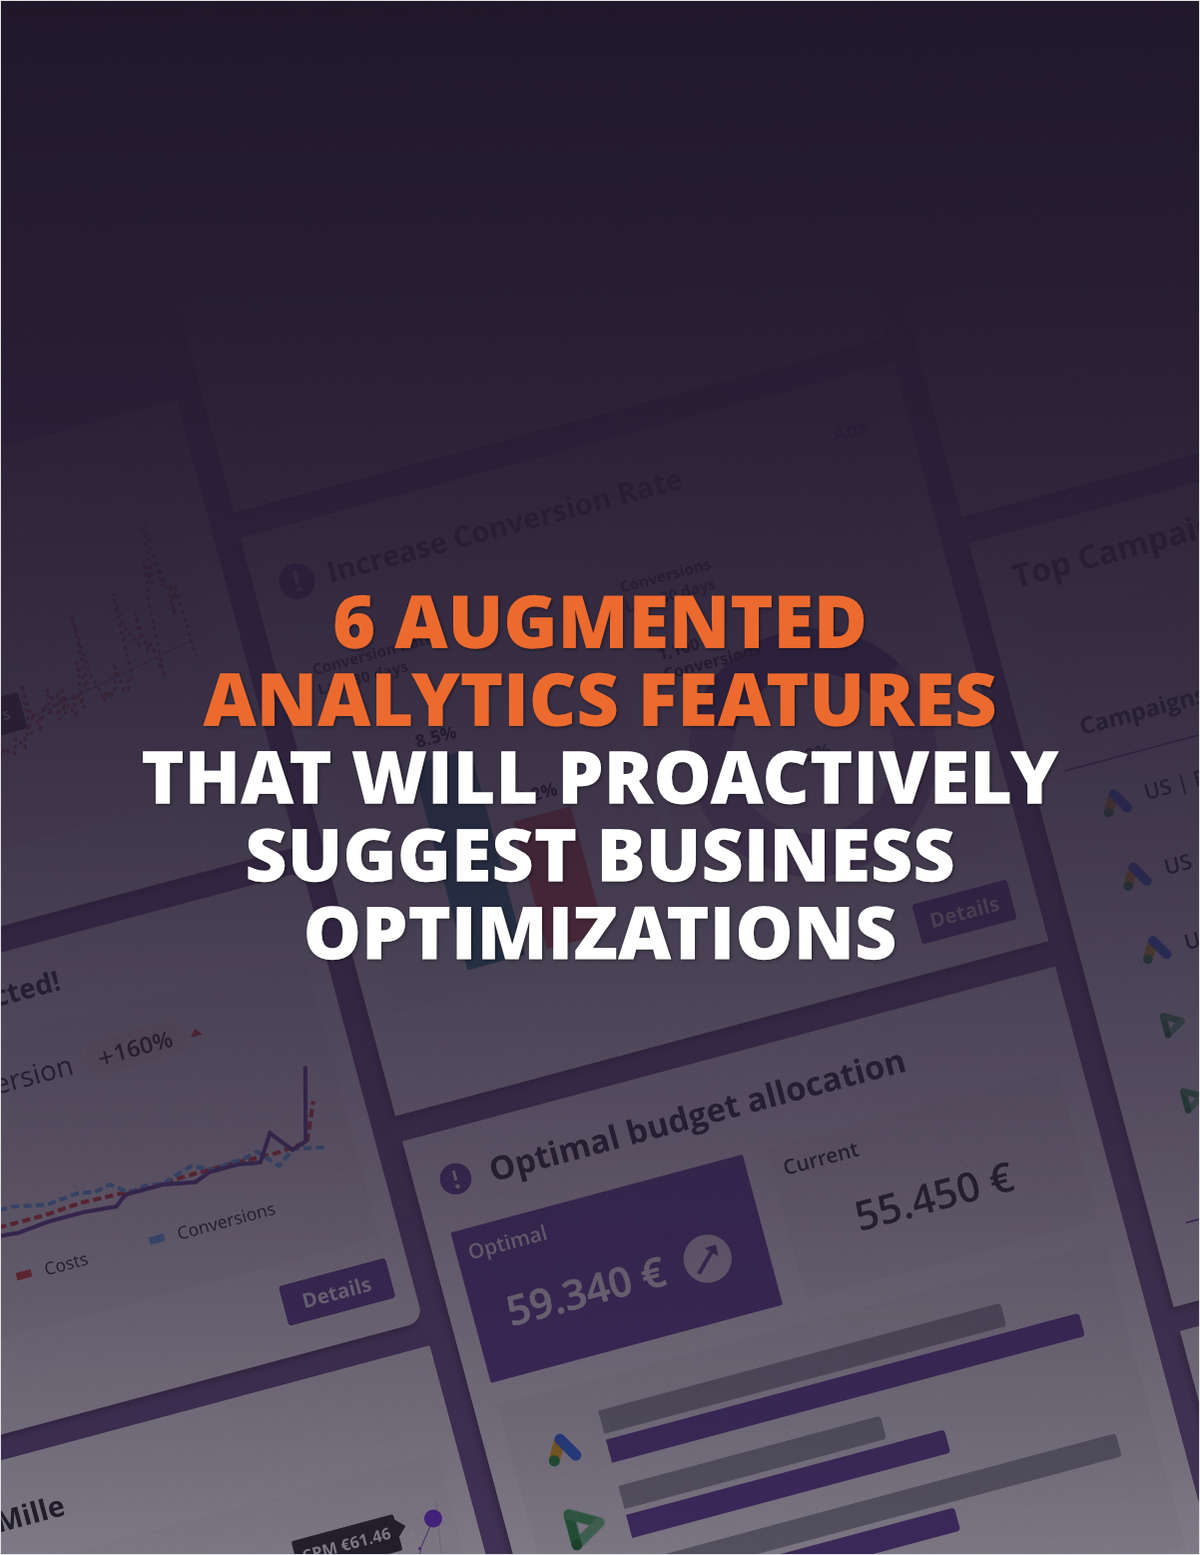 6 AUGMENTED ANALYTICS FEATURES THAT WILL PROACTIVELY SUGGEST BUSINESS OPTIMIZATIONS